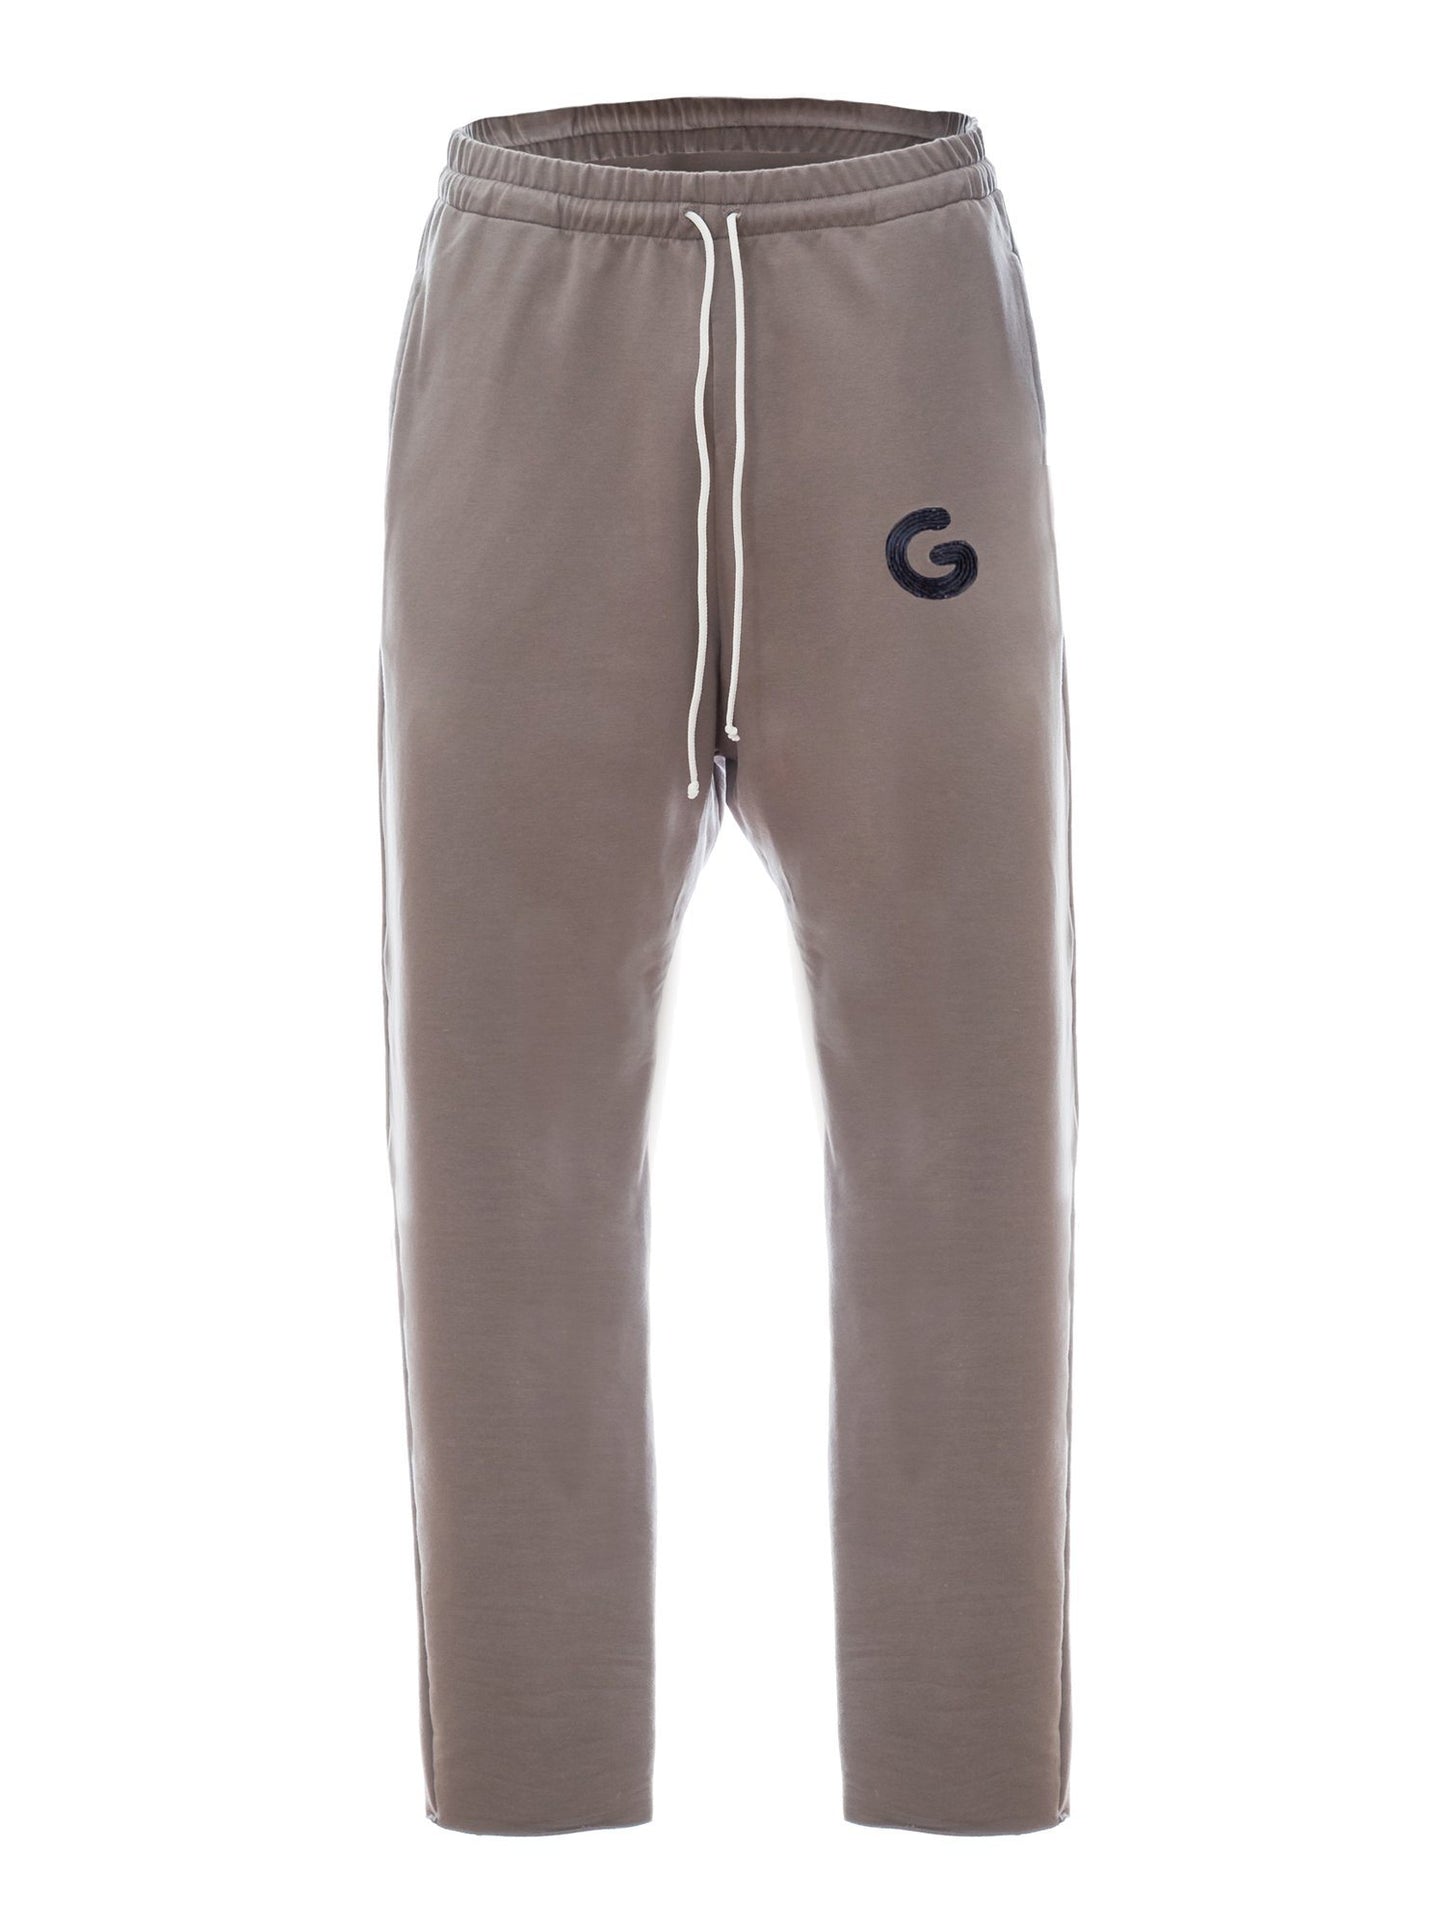 TheG Essential Joggers // paloma